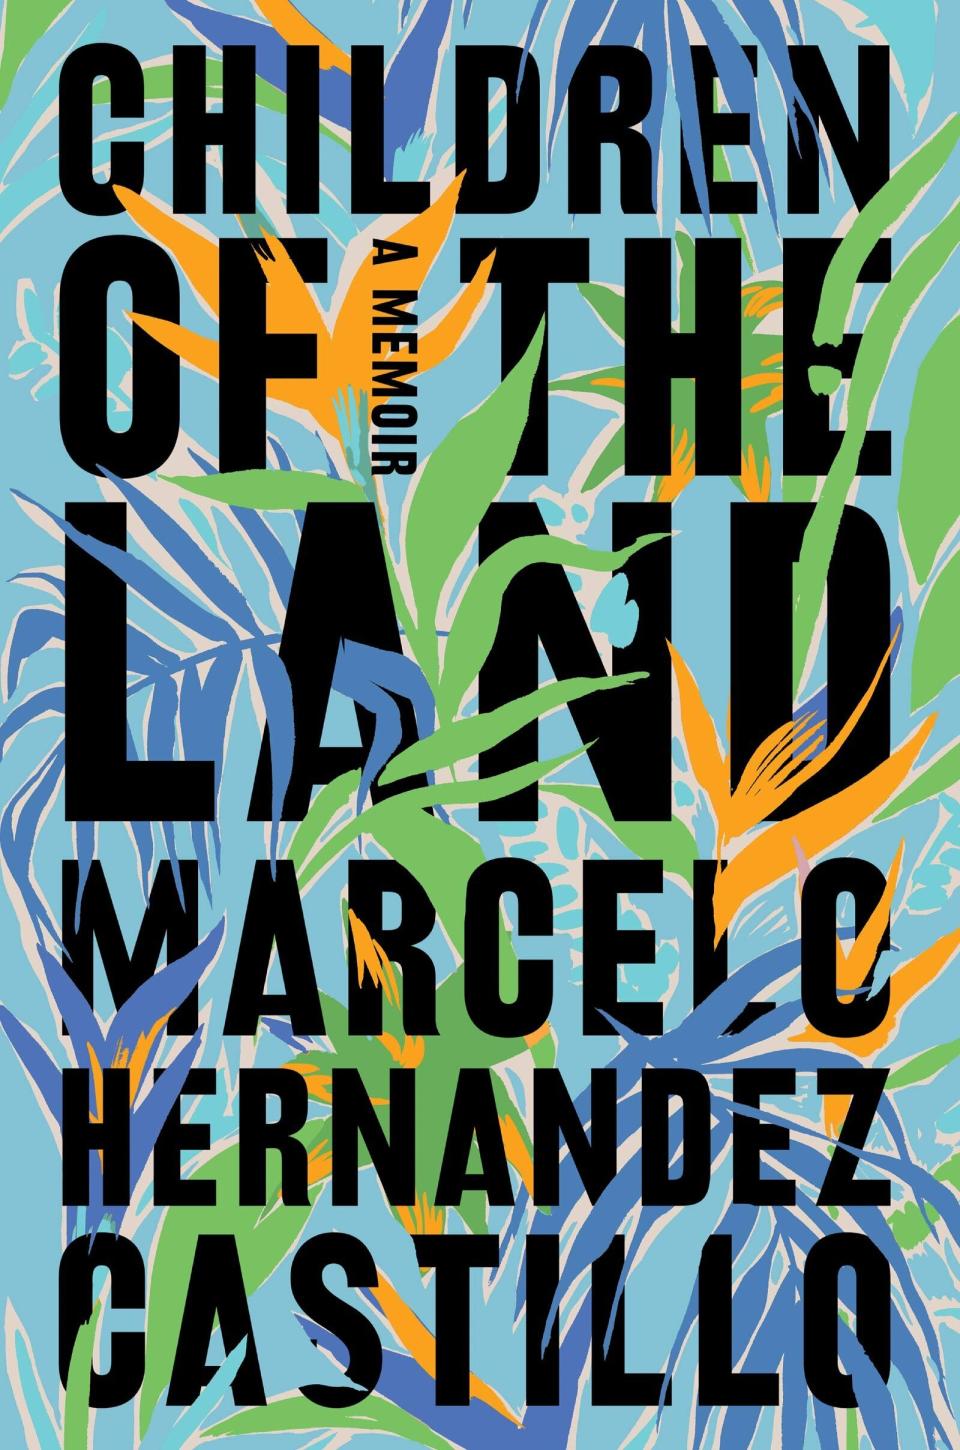 This memoir recounts how author Marcelo Hernandez Castillo grew up undocumented in California, including his father's deportation and a decade of being separated from his own wife and children as an adult. <br /><br />You can read more about this book on <a href="https://fave.co/3kP3ROl" target="_blank" rel="noopener noreferrer">Goodreads</a> and find it for $27 at <a href="https://fave.co/305Fwf2" target="_blank" rel="noopener noreferrer">Bookshop</a> (you can preorder the paperback version, too). It&rsquo;s also available at <a href="https://amzn.to/3kIyLb1" target="_blank" rel="noopener noreferrer">Amazon</a>.